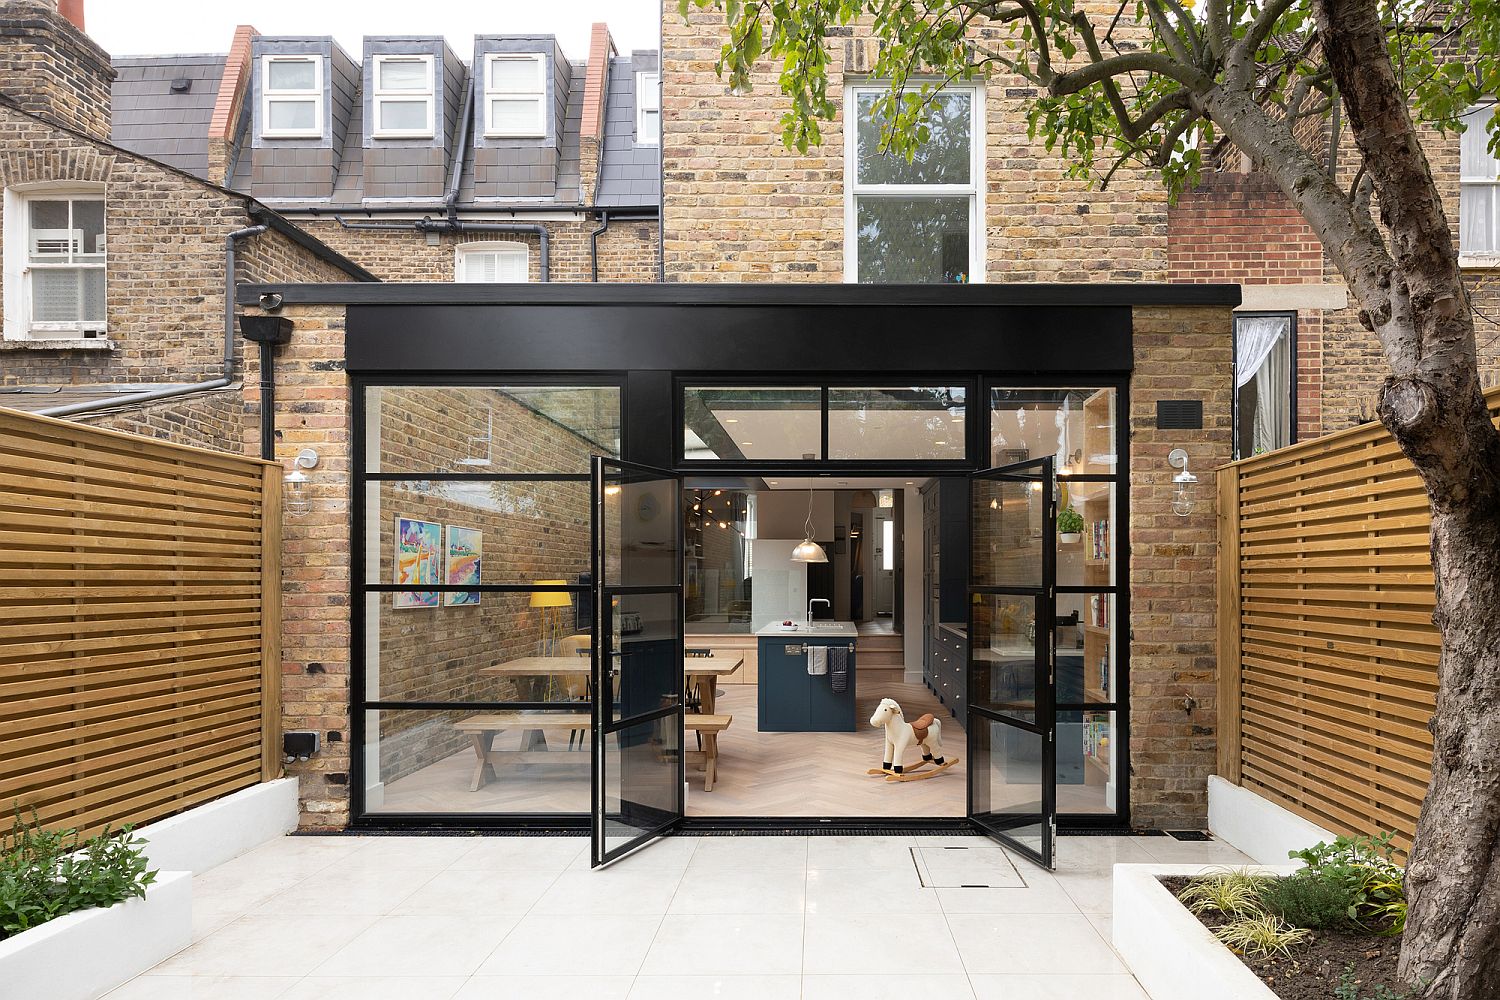 Contemporary-rear-extension-in-glass-and-brick-for-the-small-terrace-house-in-London-18686